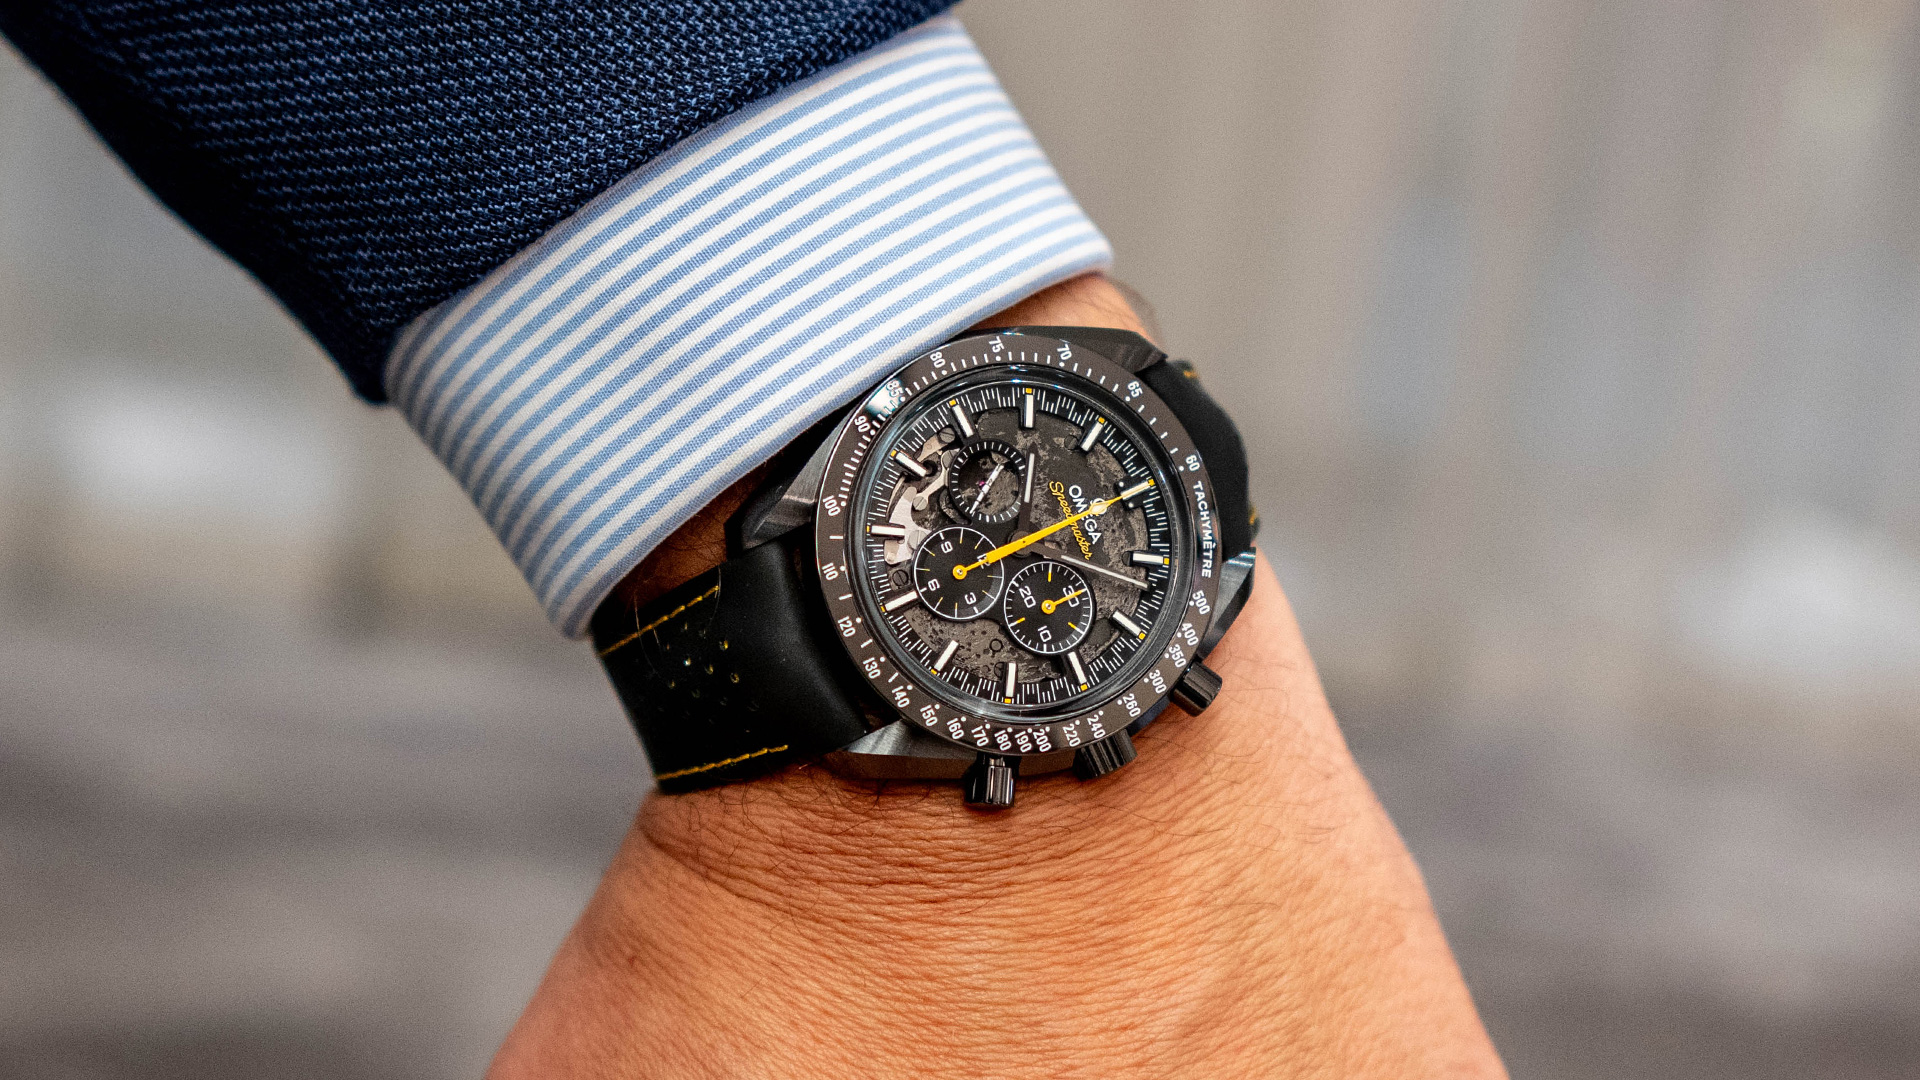 Best Entry-Level Luxury Watch: Top 10 Picks - The Watch Company